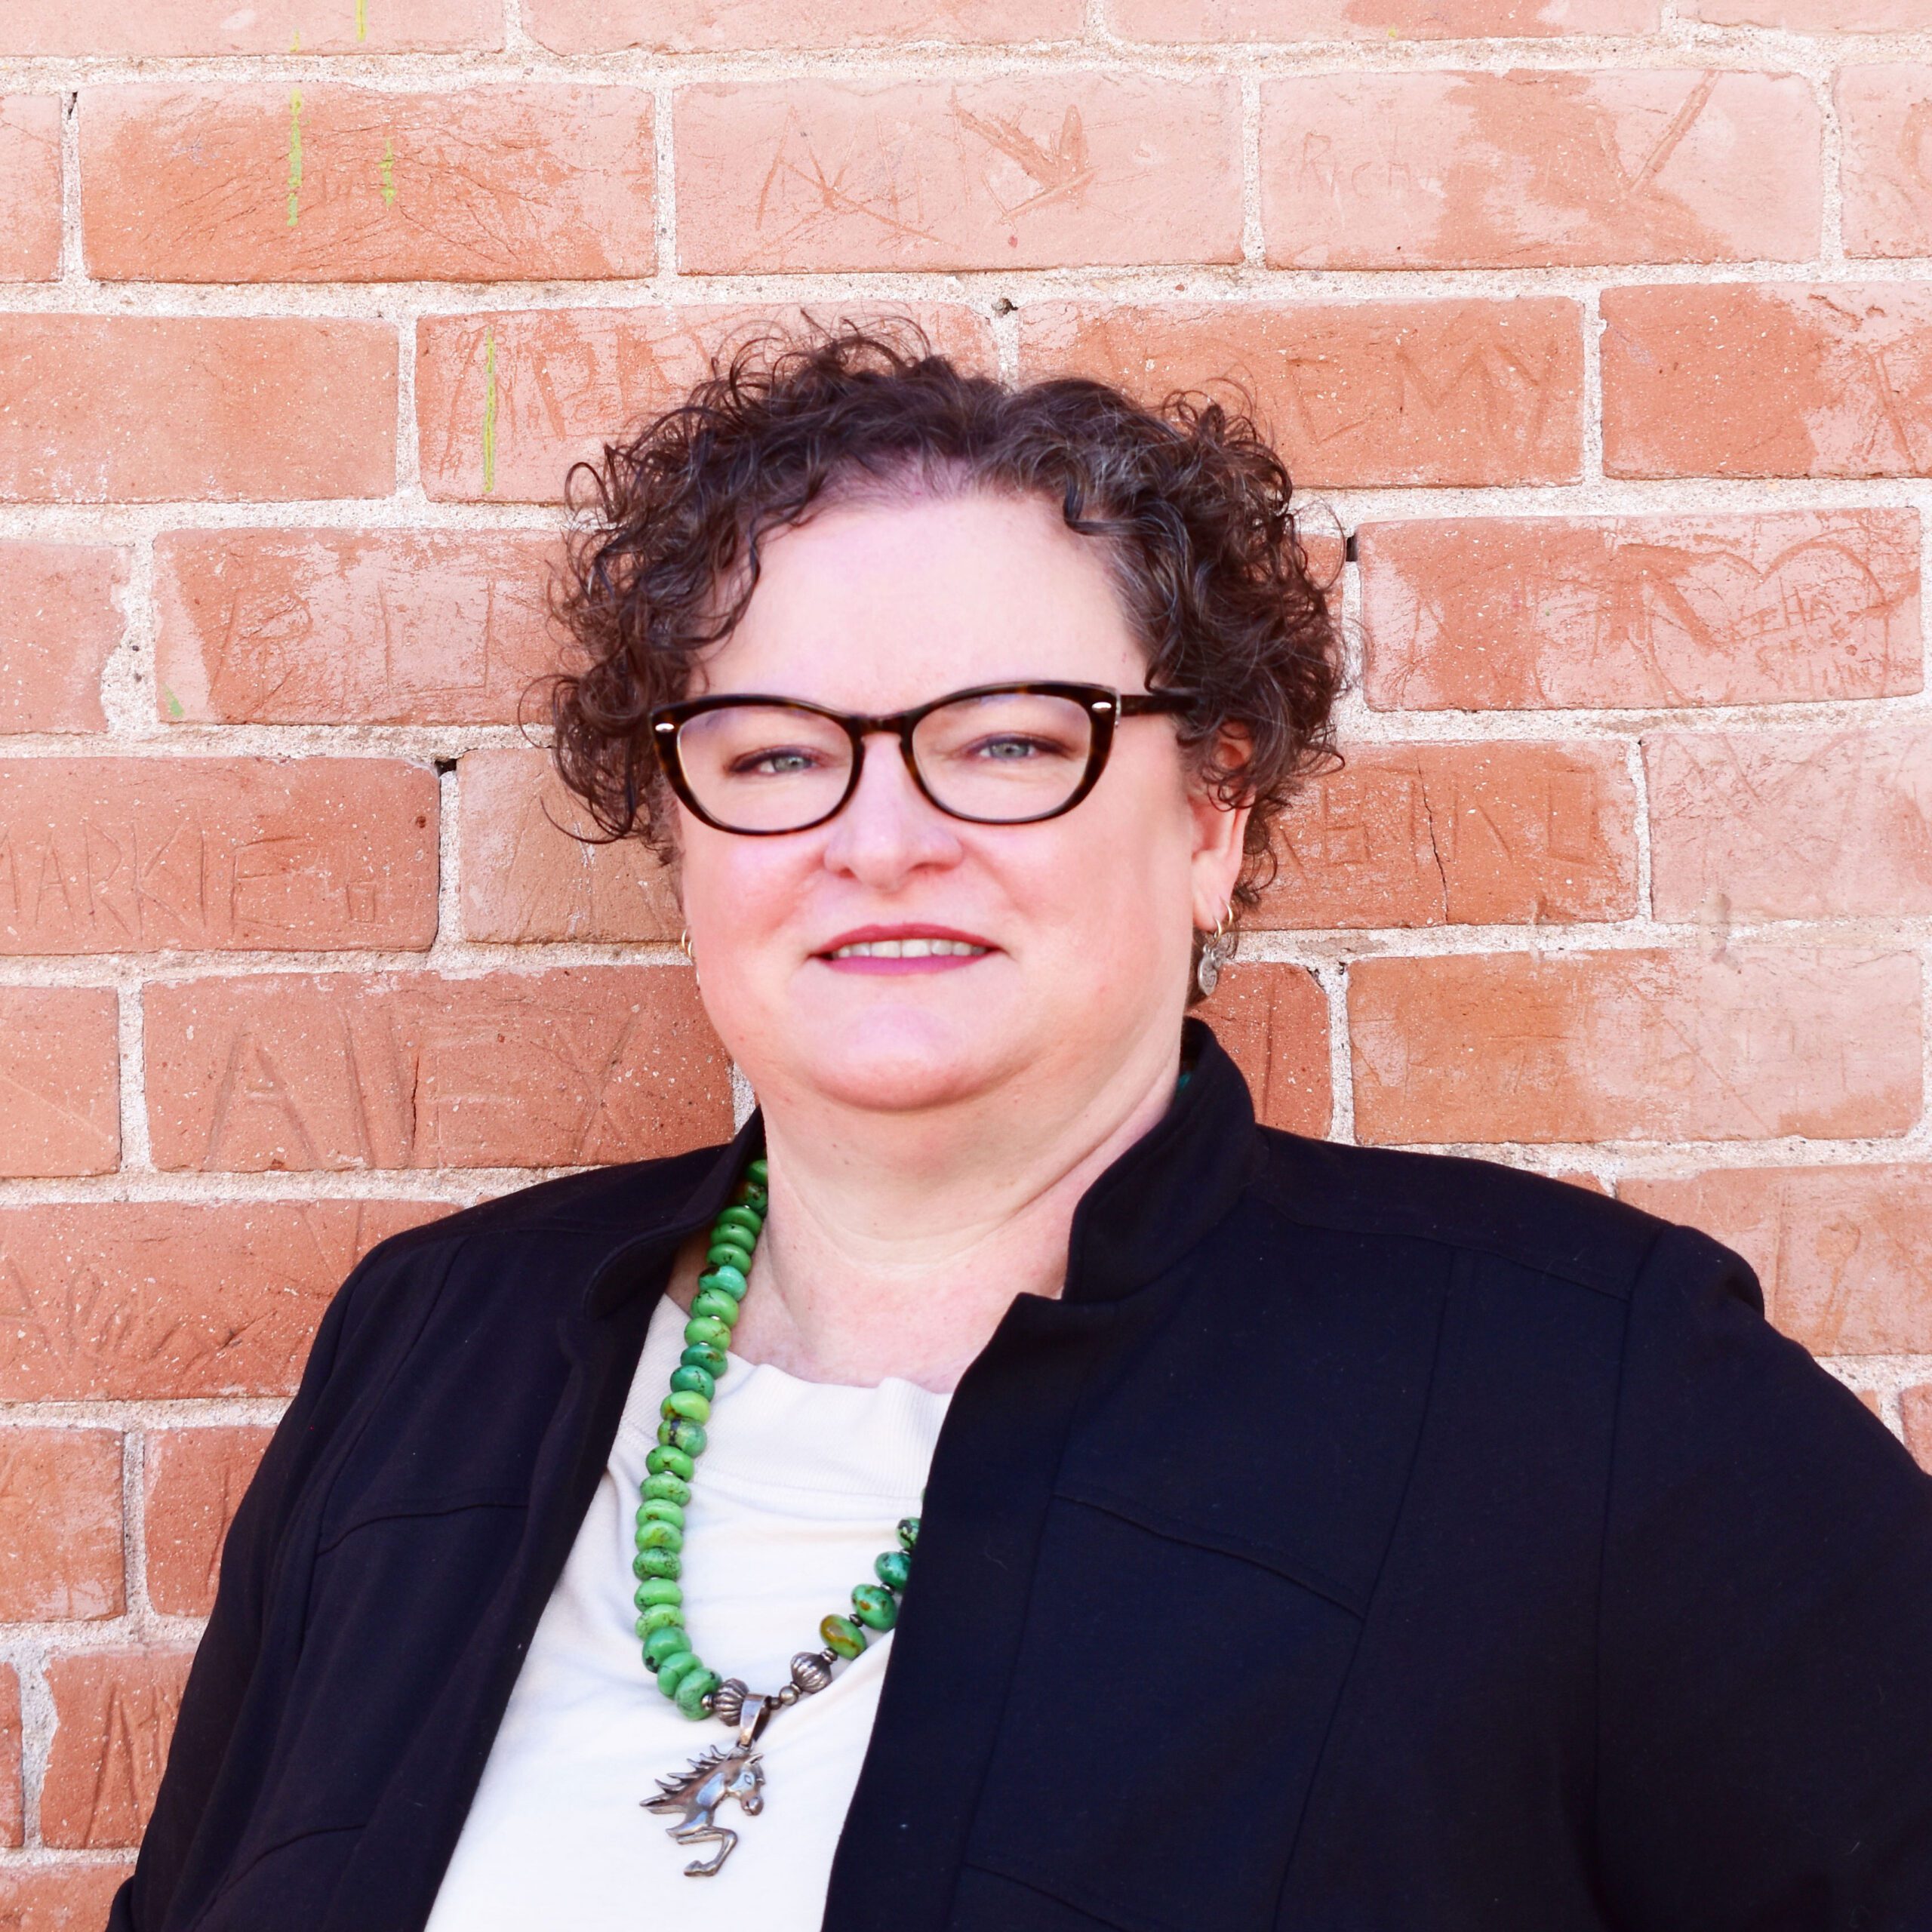 Lisa Bowers, Gaymber President, a light-skinned woman with curly hair and glasses stands in front of a brick wall